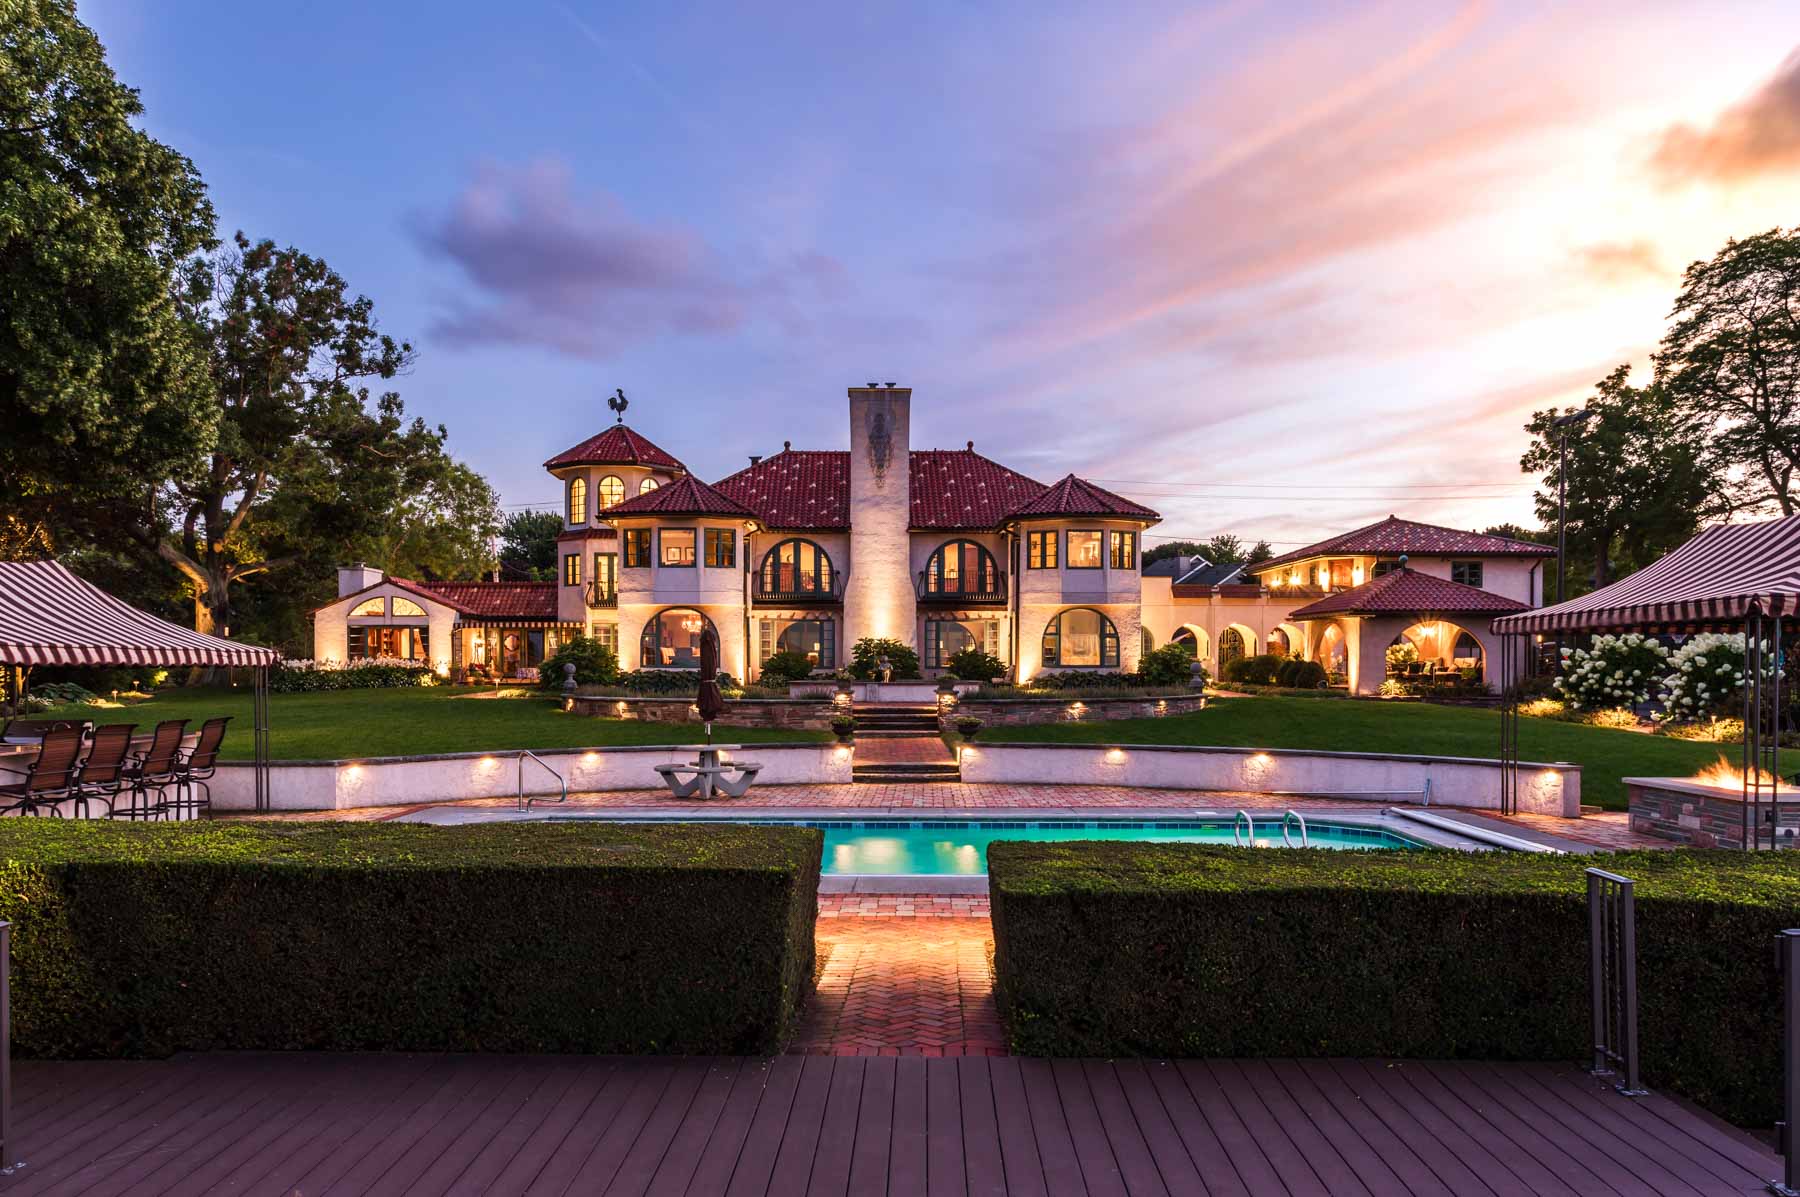 Twilight photograph of a luxury home